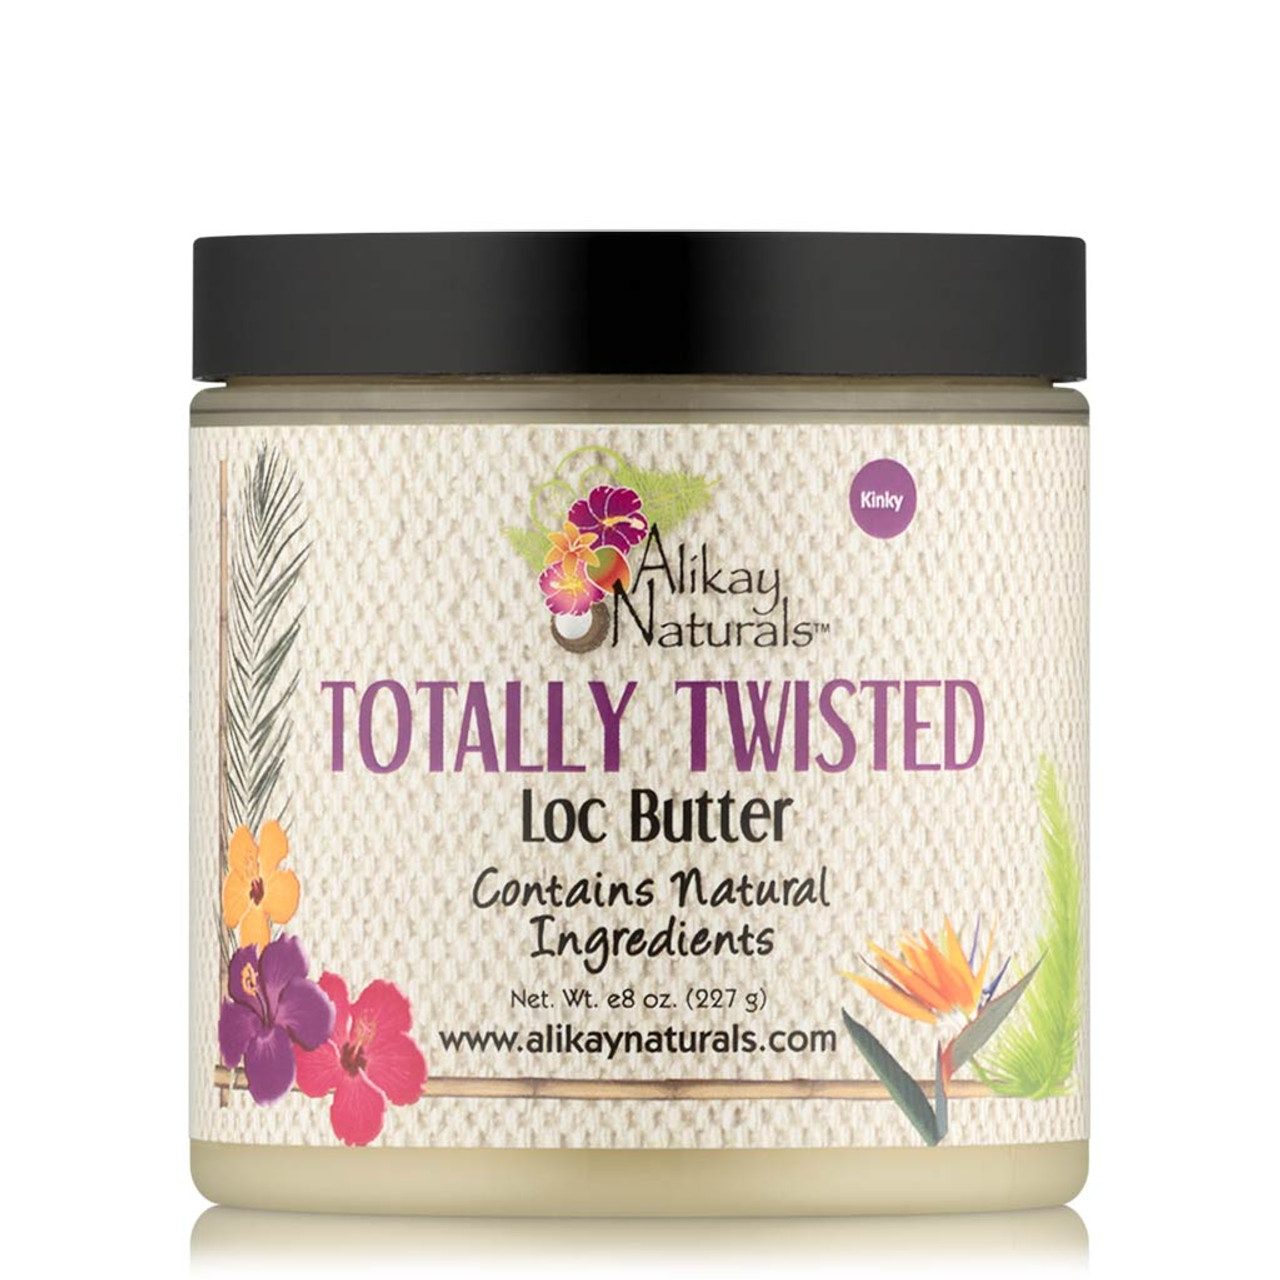 Alikay Naturals Totally Twisted Loc Butter (8 oz.) - NaturallyCurly